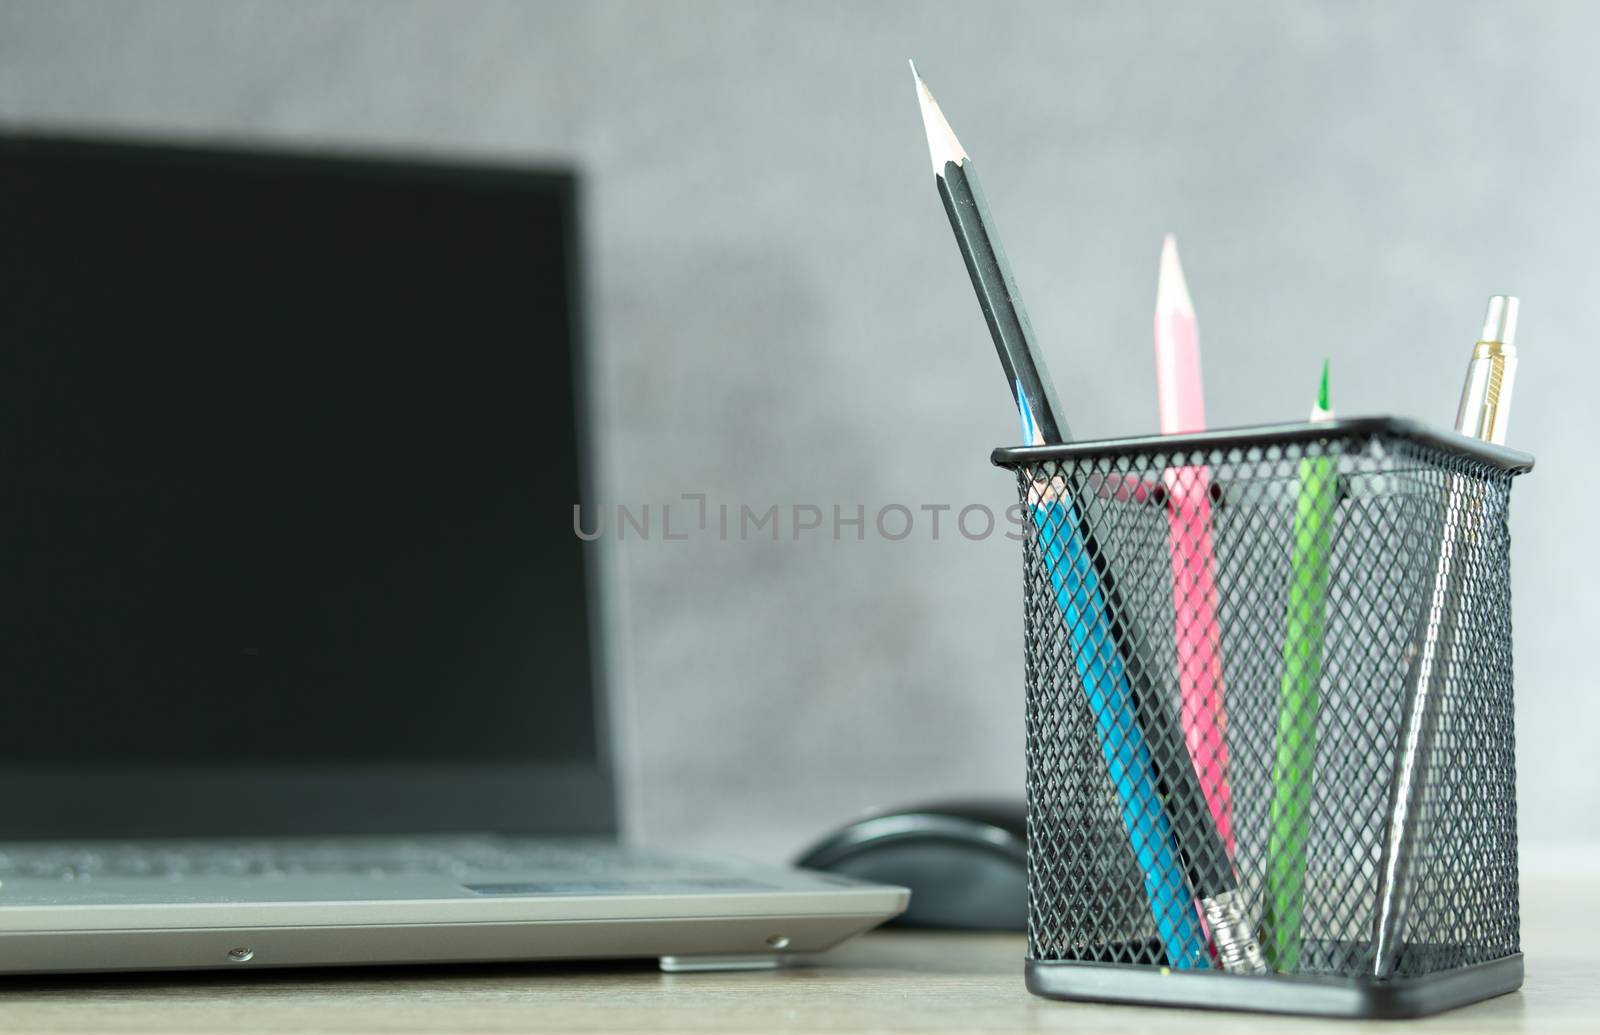 Black basket with blue pencil Ready to use with other colored pencils And notebook computers placed blurred behind on the desk, office equipment at work or at home. Future business concepts